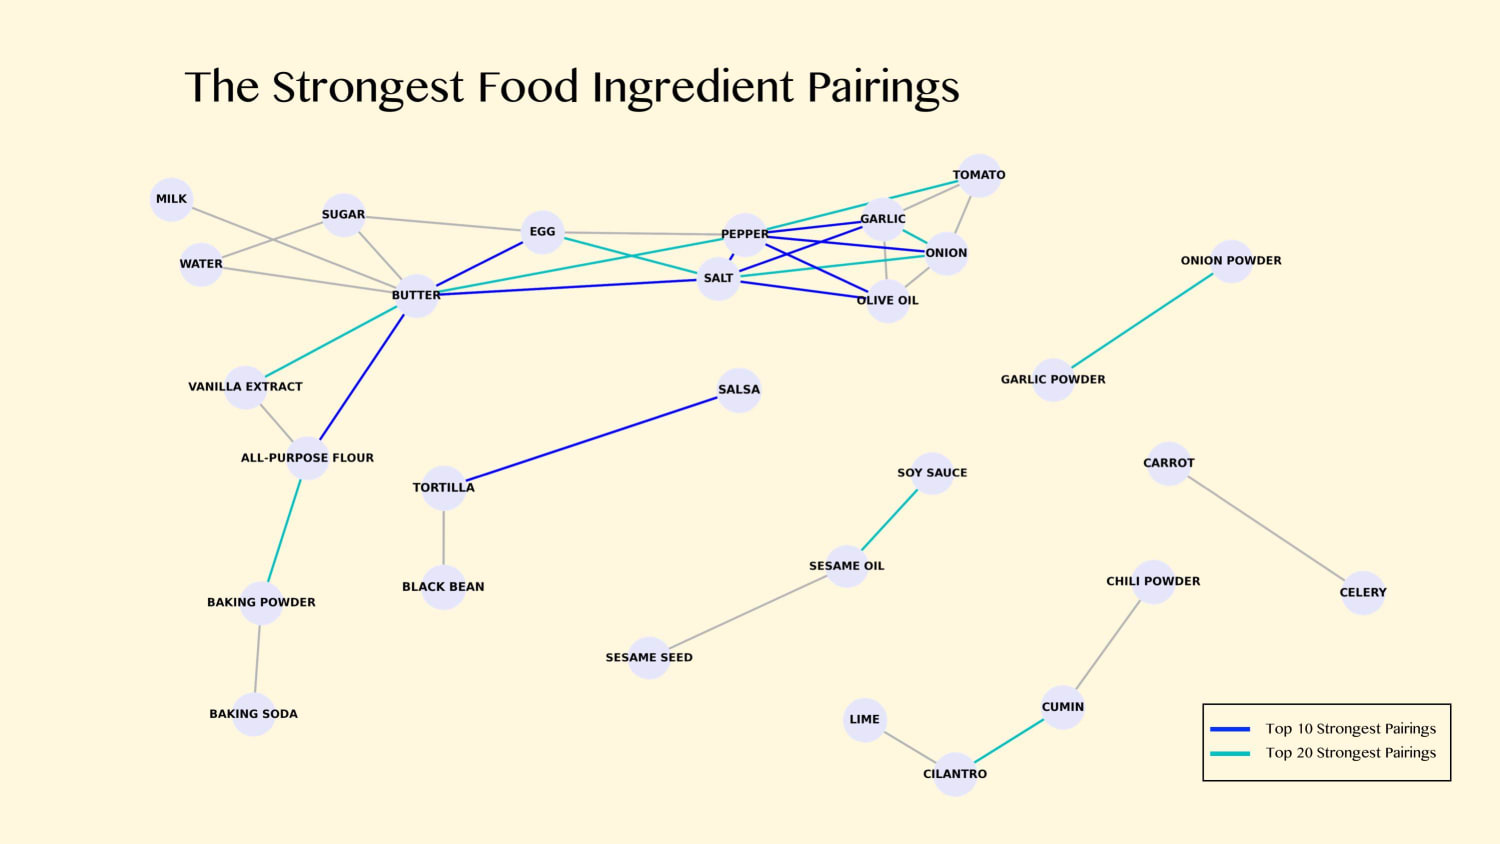 I scraped 17,200 food recipes from an American food website and charted the strongest ingredient pairings